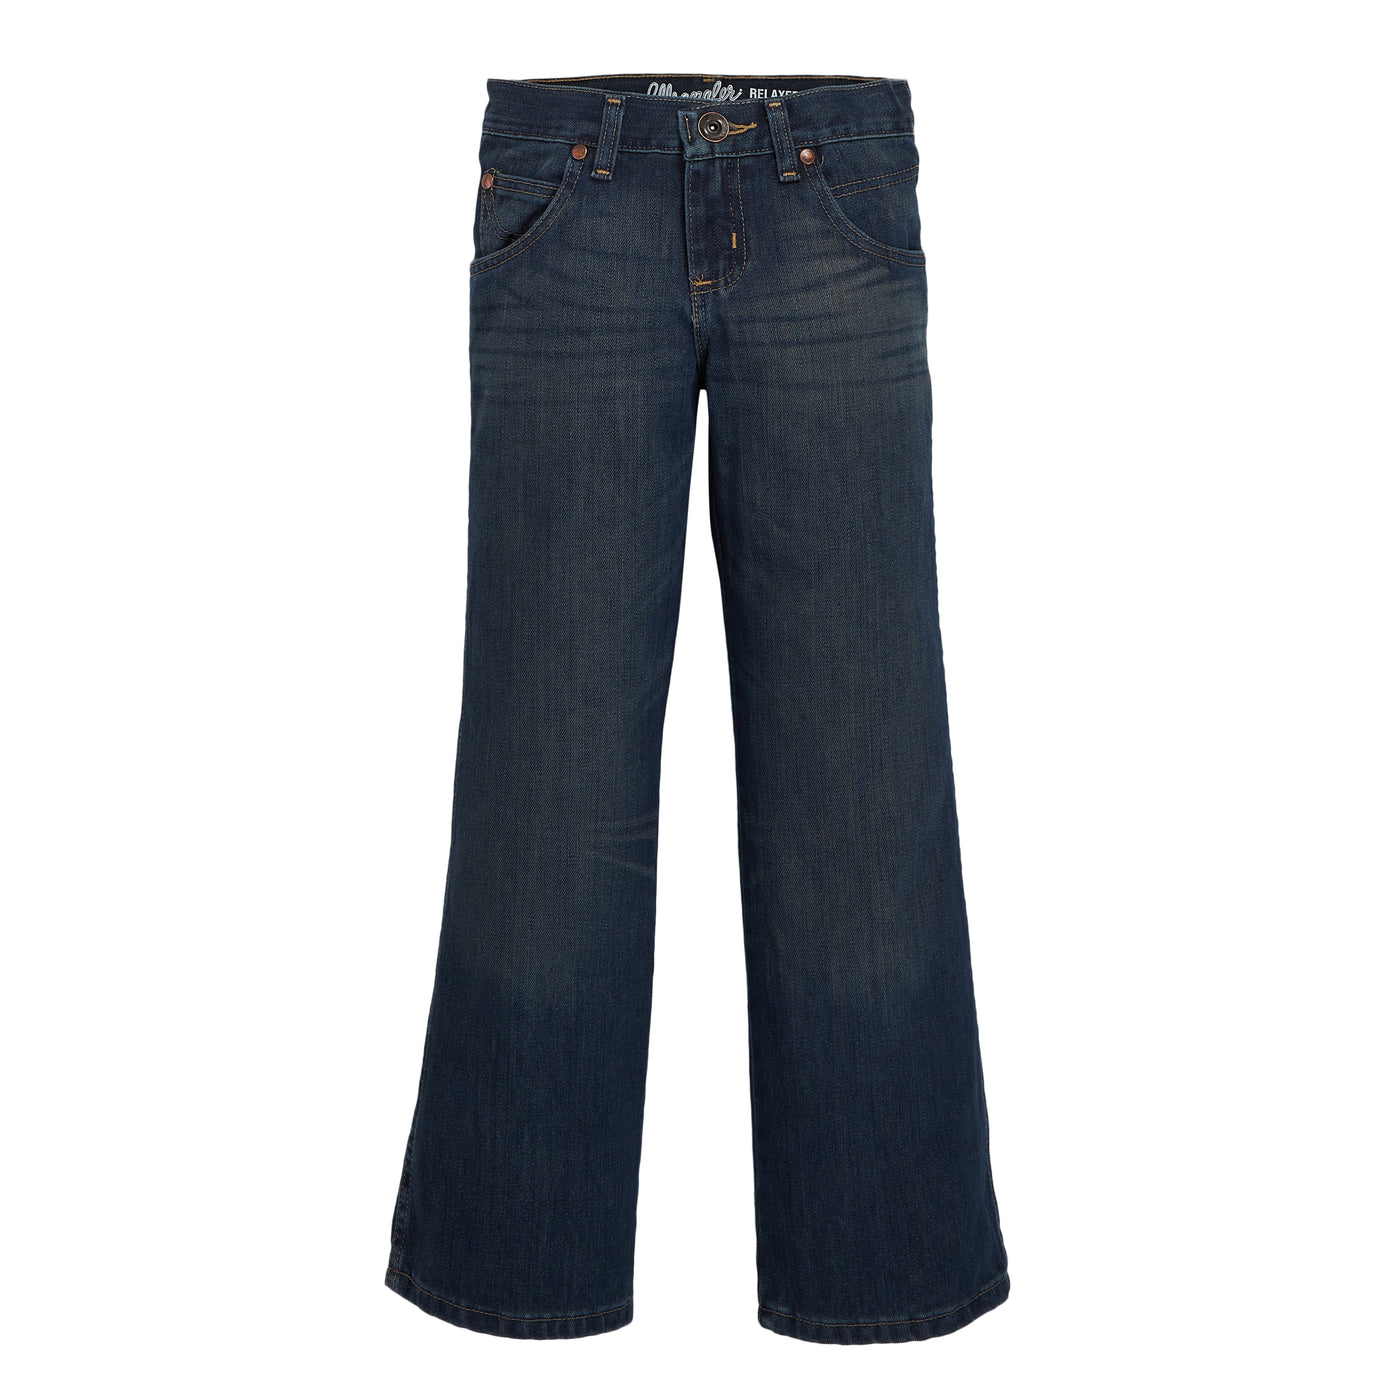 Boys Retro Relax Mid Rise Bootcut Jeans